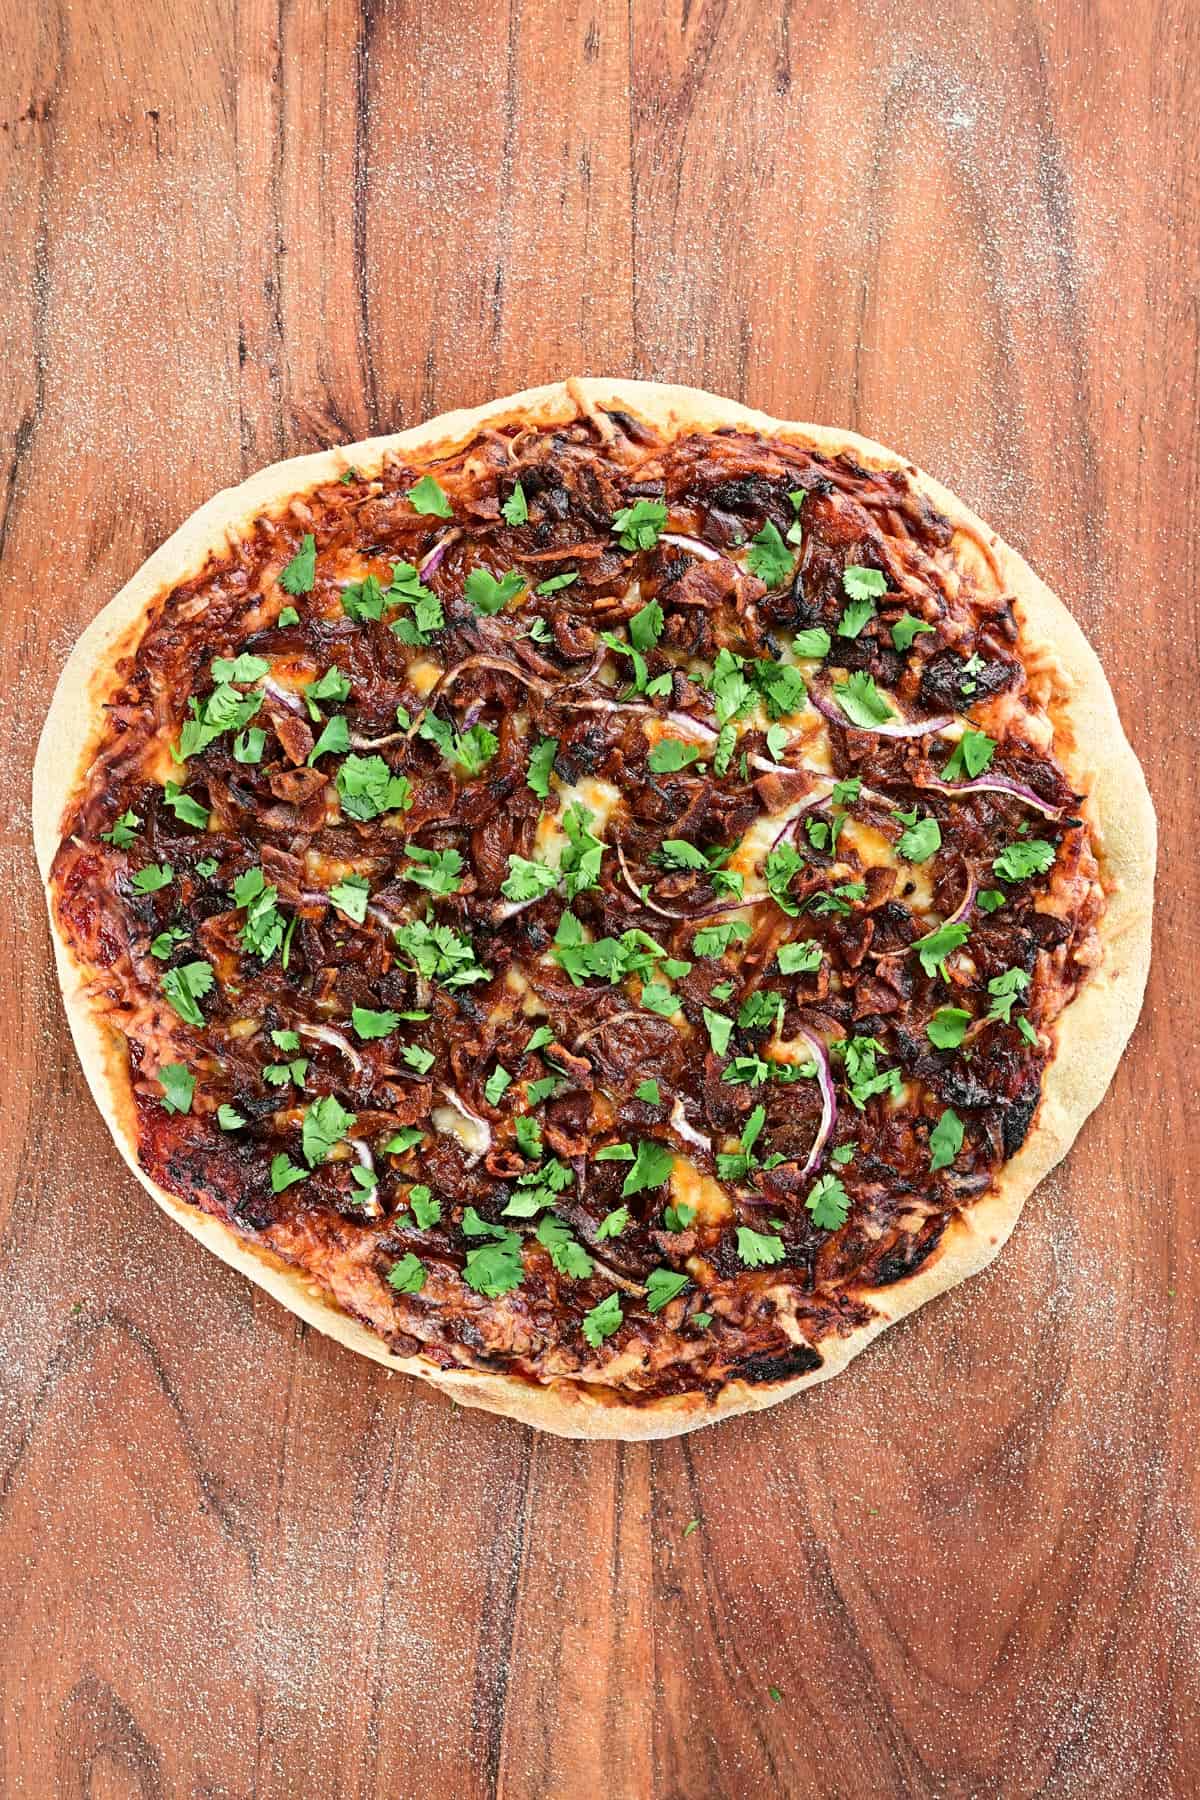 A pulled pork pizza on a wood cutting board.